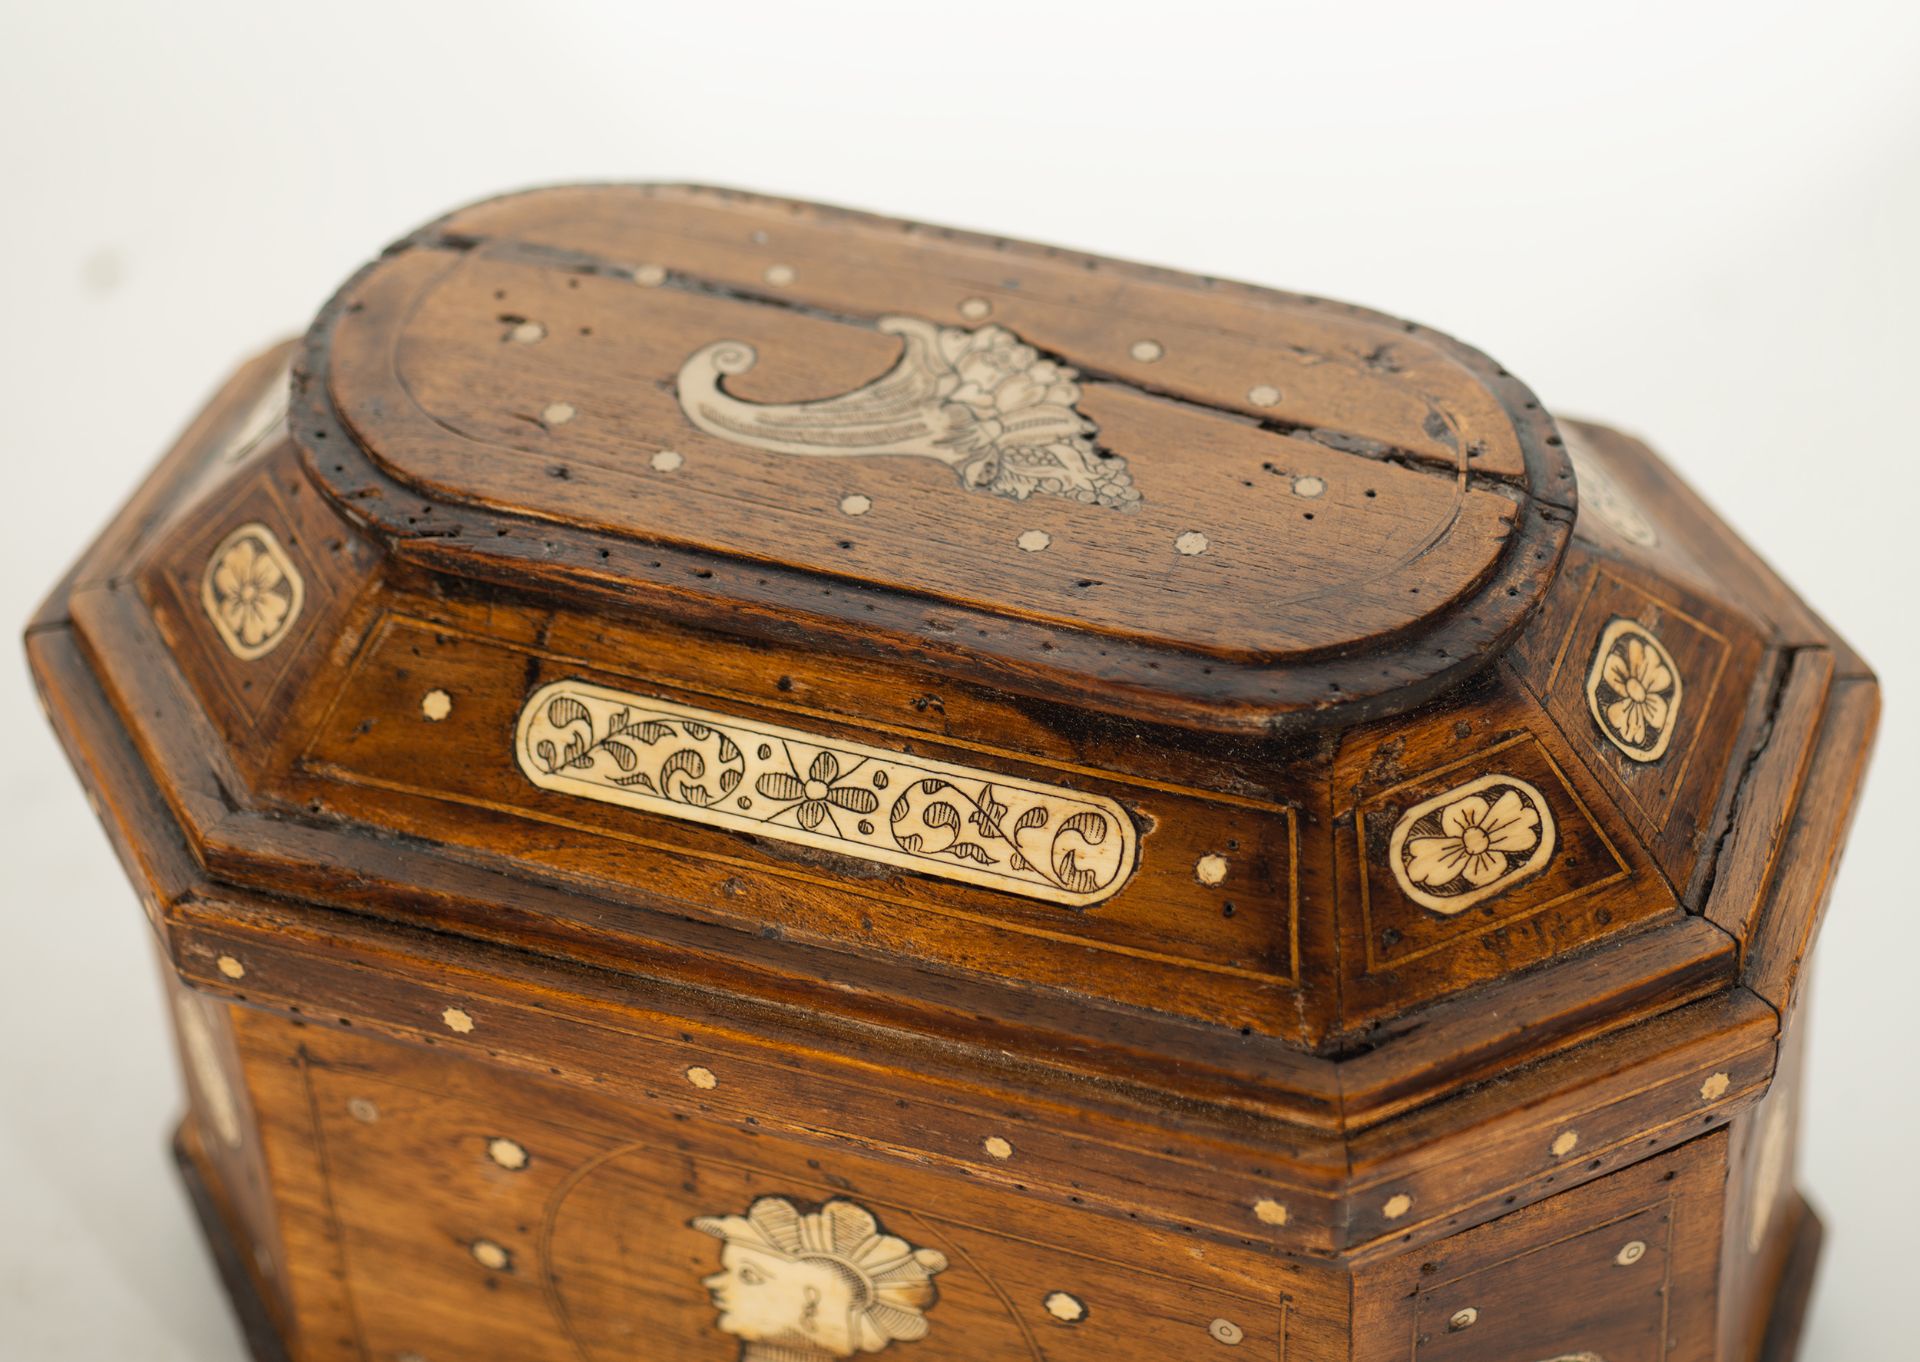 Renaissance style chest in fruit wood and carved bone applications, Spanish school of the 19th centu - Image 4 of 7